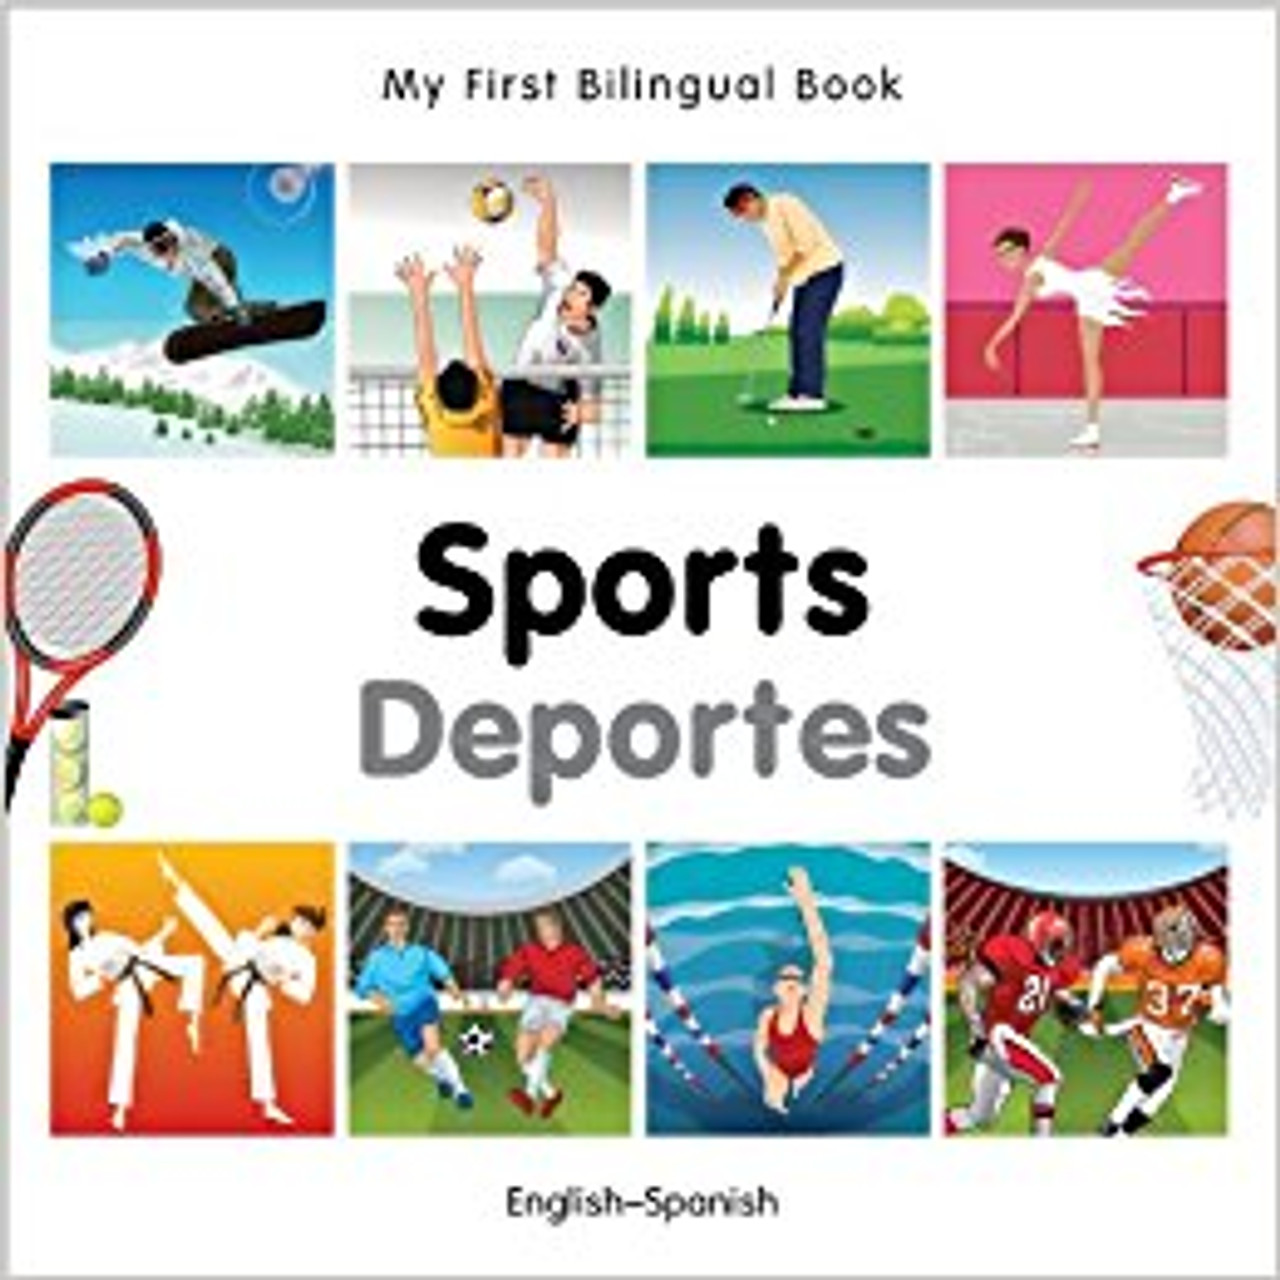 Sports/Deportes by Millet Publishing 